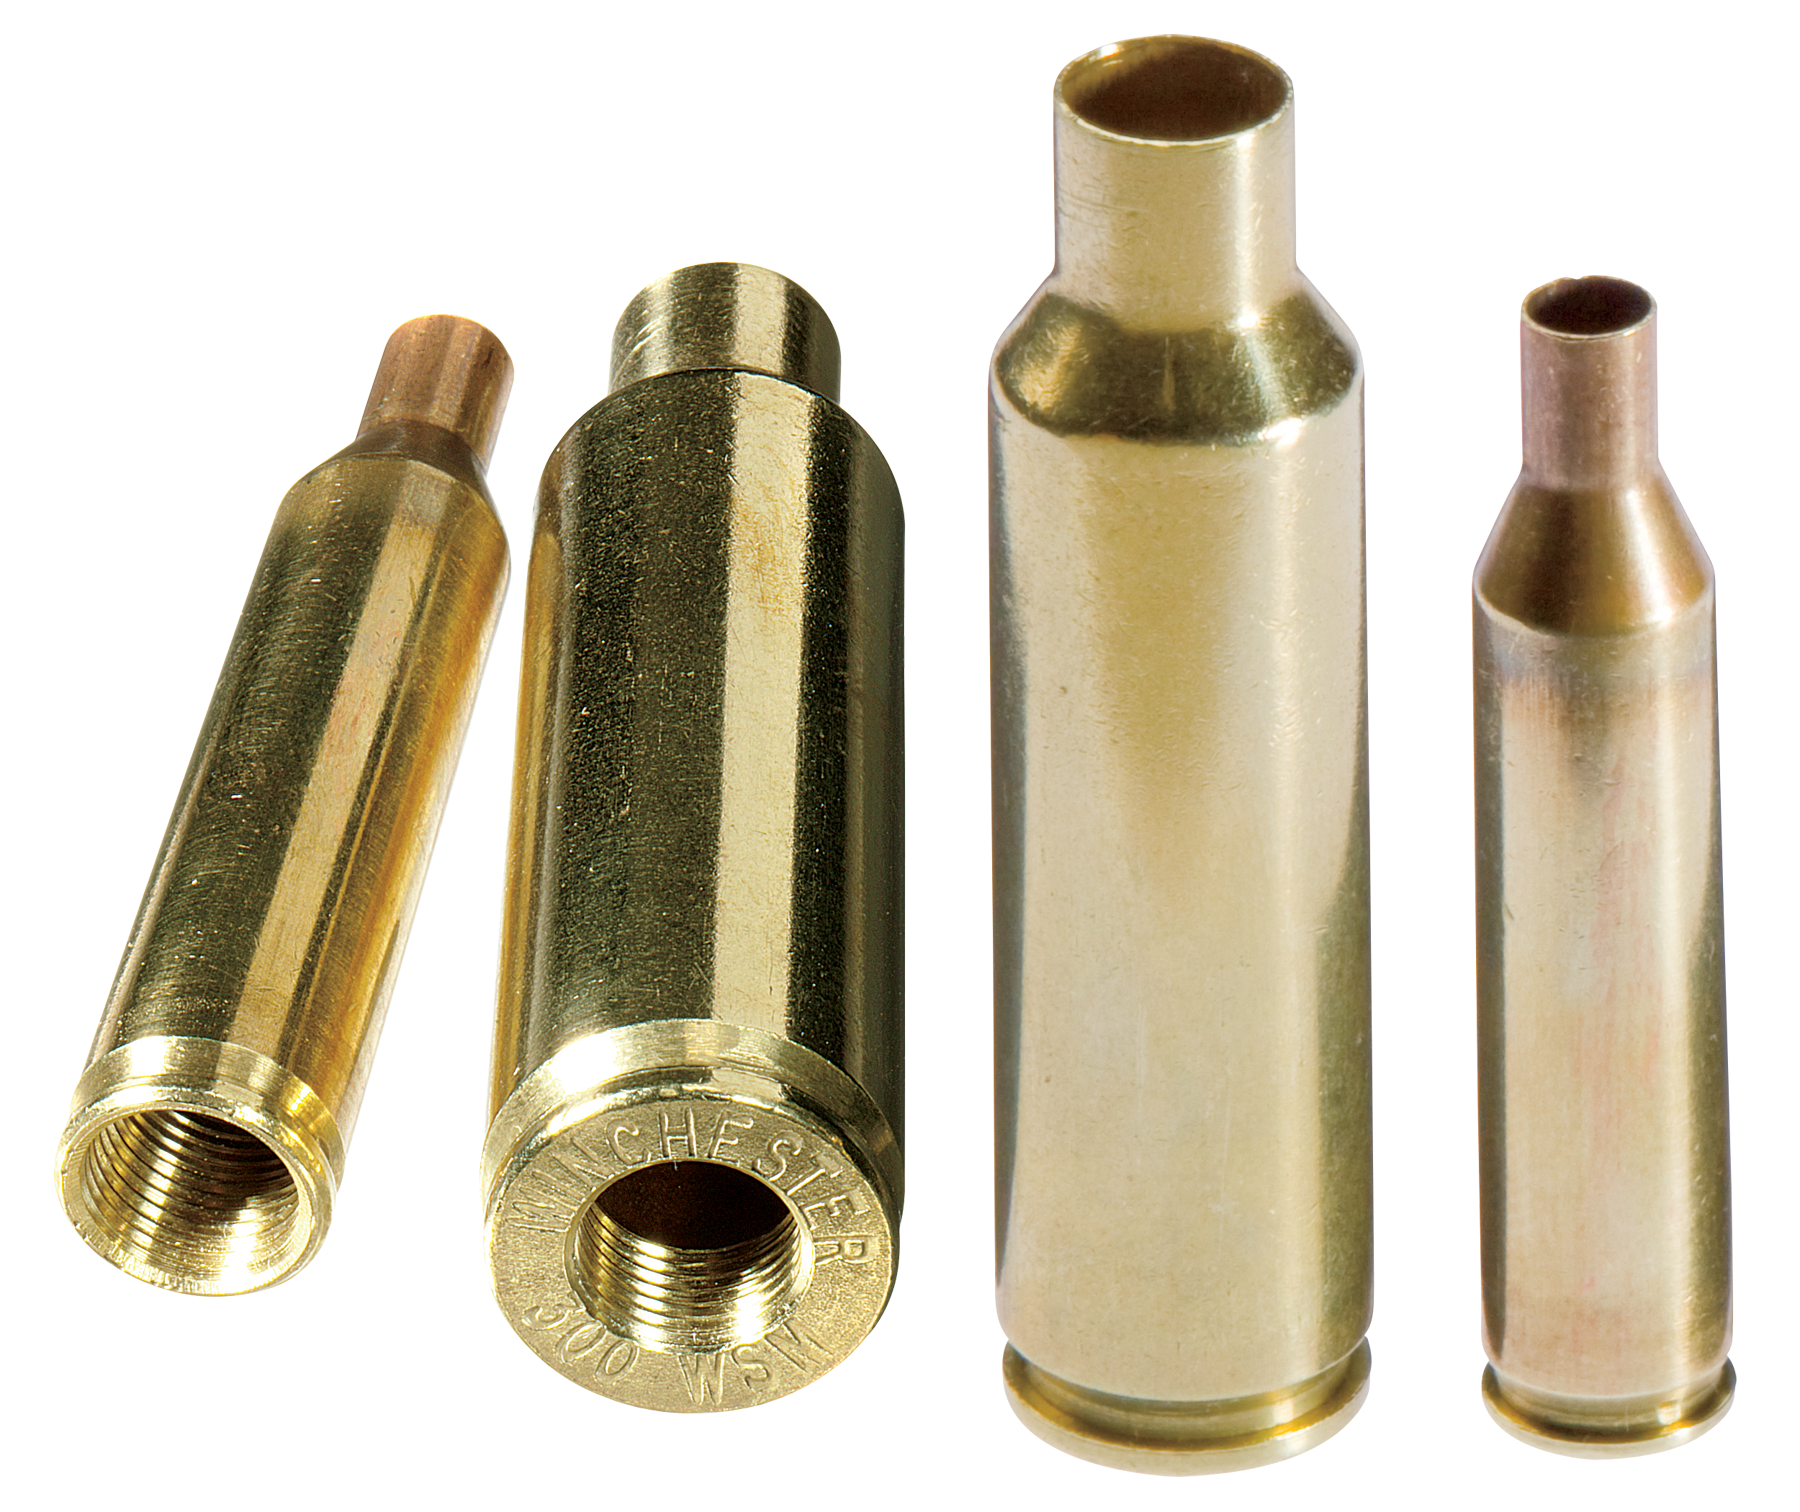 Hornady Lock-N-Load Series Modified Cases - 7mm Remington Magnum